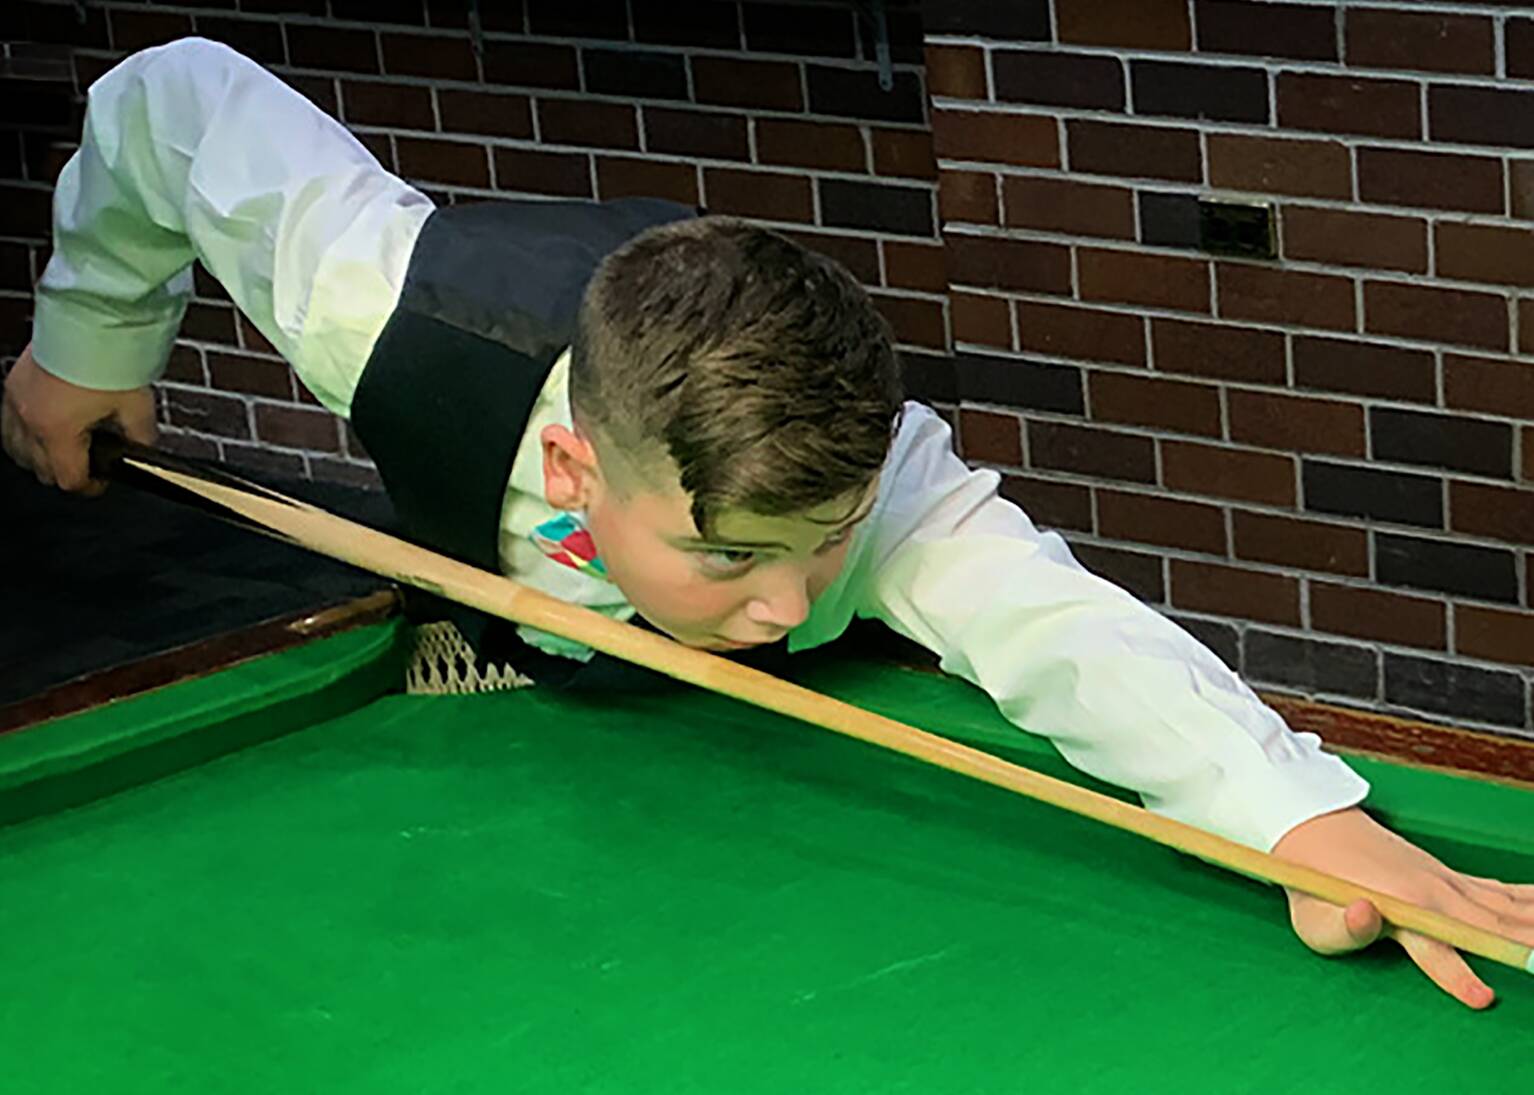 Fairy Meadow youngster Zac Hilton shows promise on snooker table Illawarra Mercury Wollongong, NSW